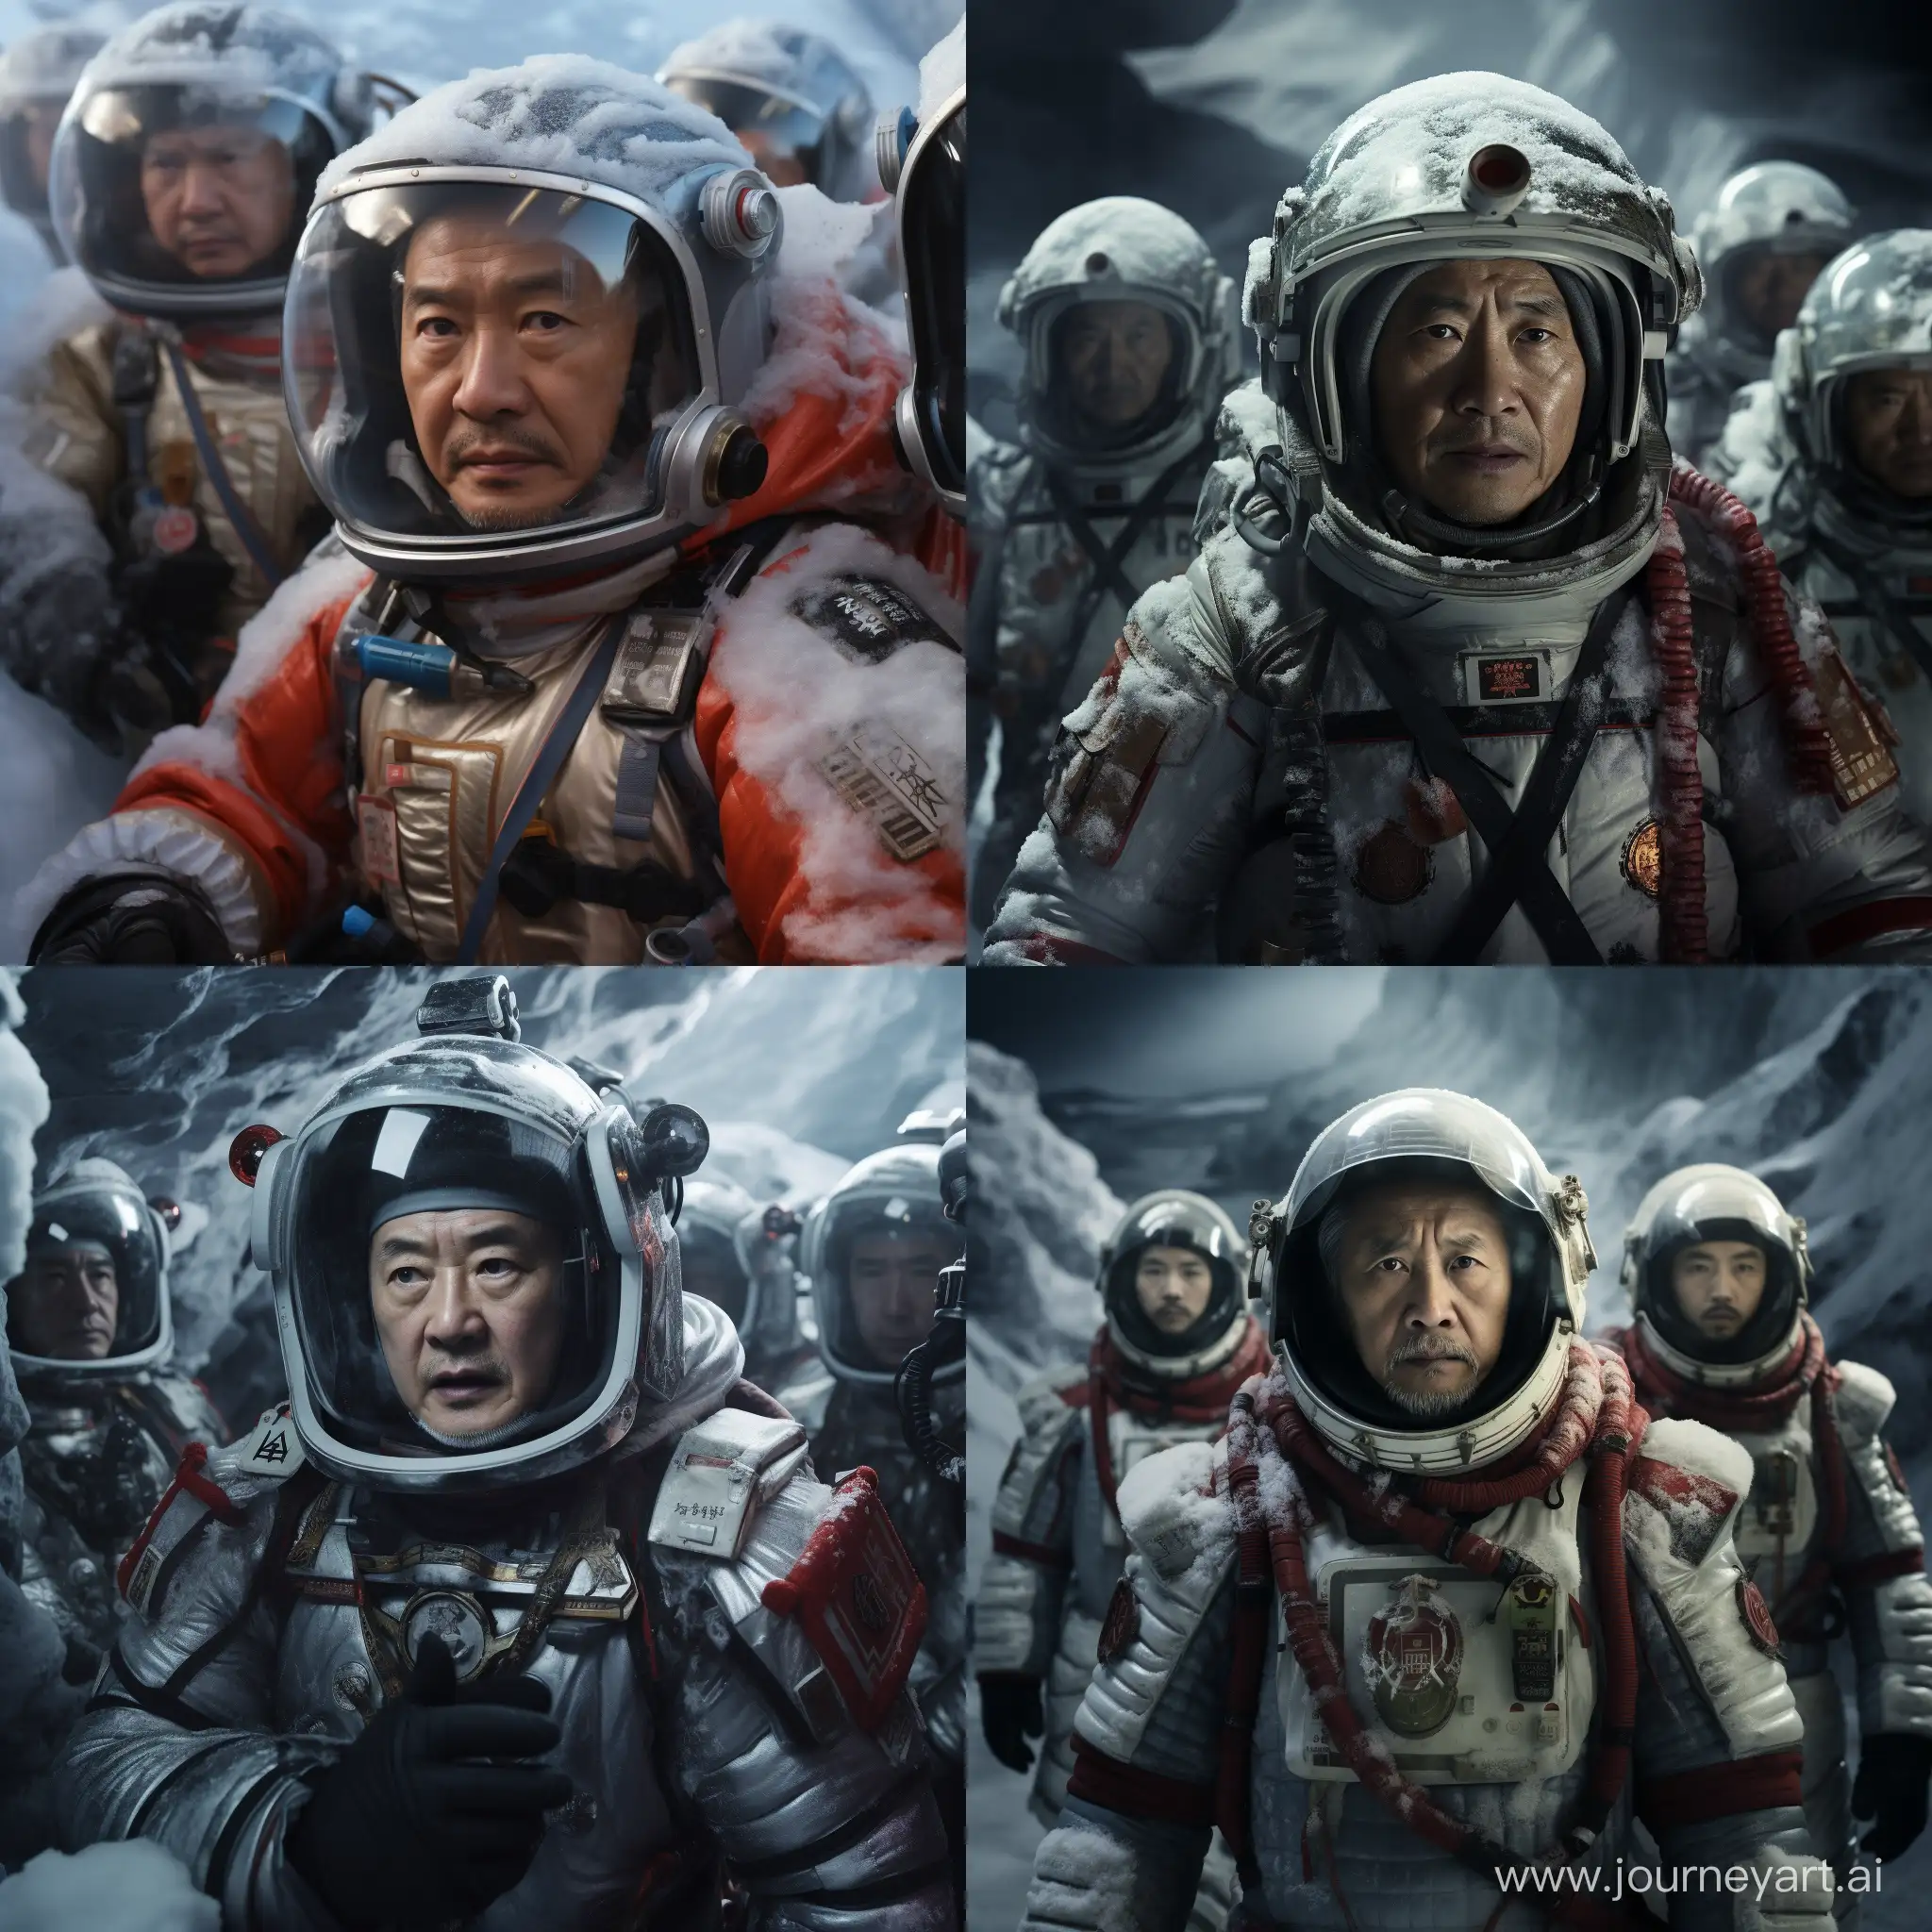 Chinese-Filmmakers-Challenge-Western-Ideologies-with-The-Wandering-Earth-2-at-Oscars